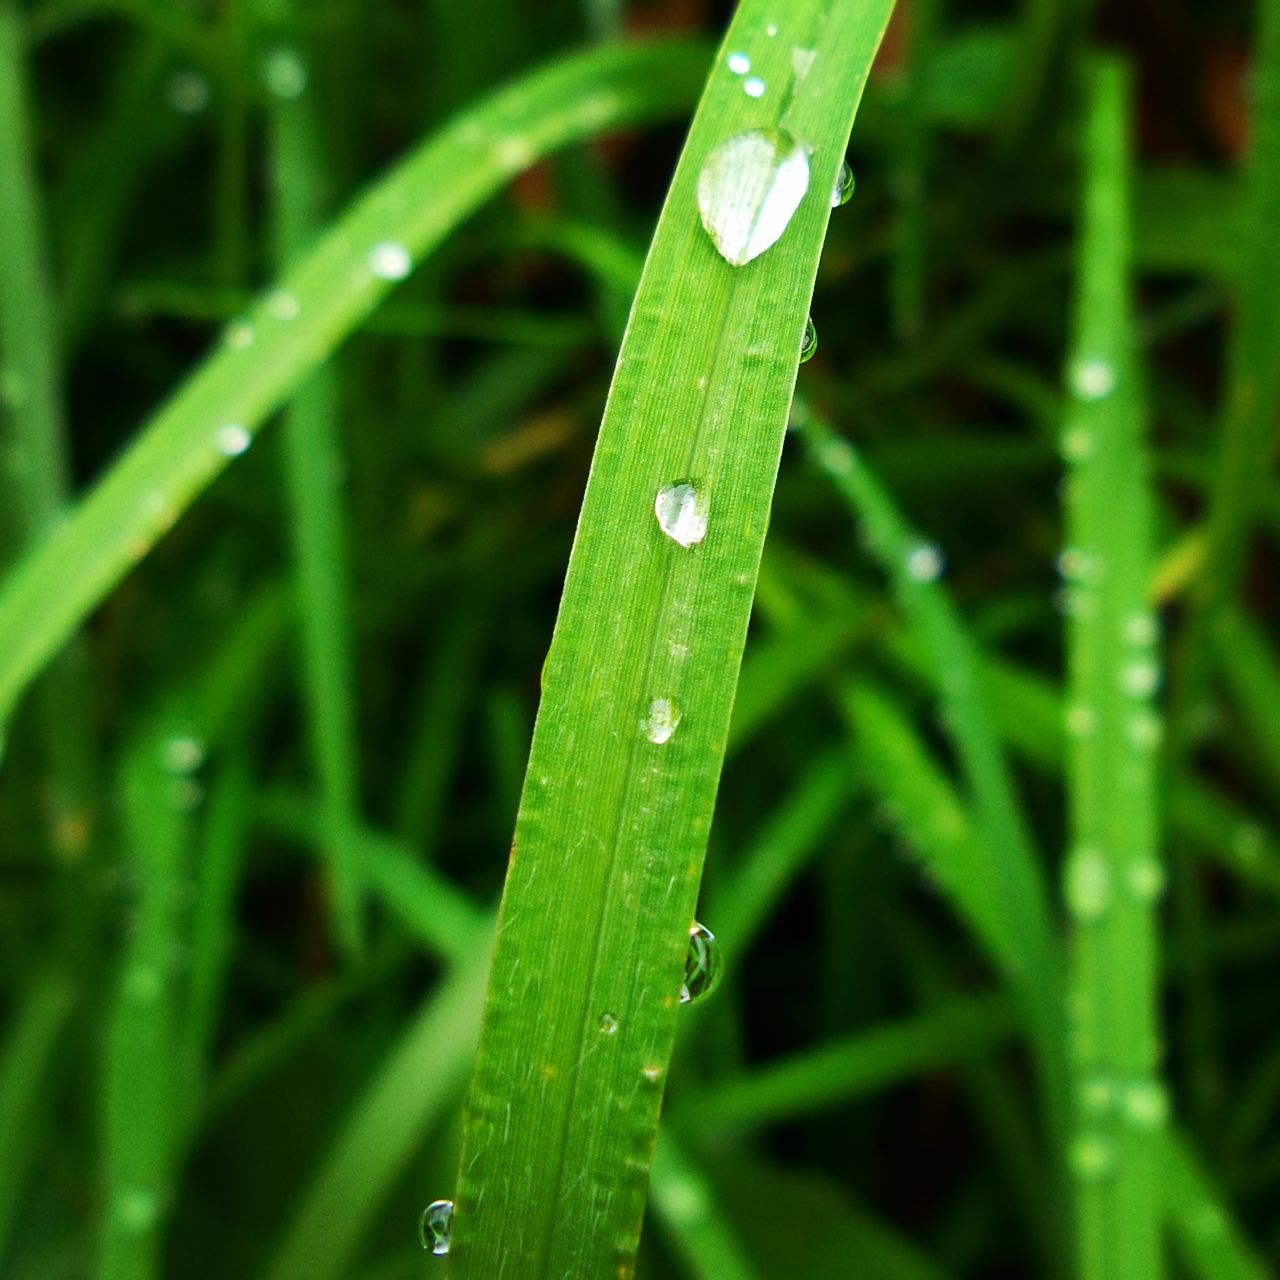 drop, green color, wet, grass, growth, water, blade of grass, close-up, dew, leaf, nature, freshness, beauty in nature, focus on foreground, plant, green, selective focus, water drop, fragility, droplet